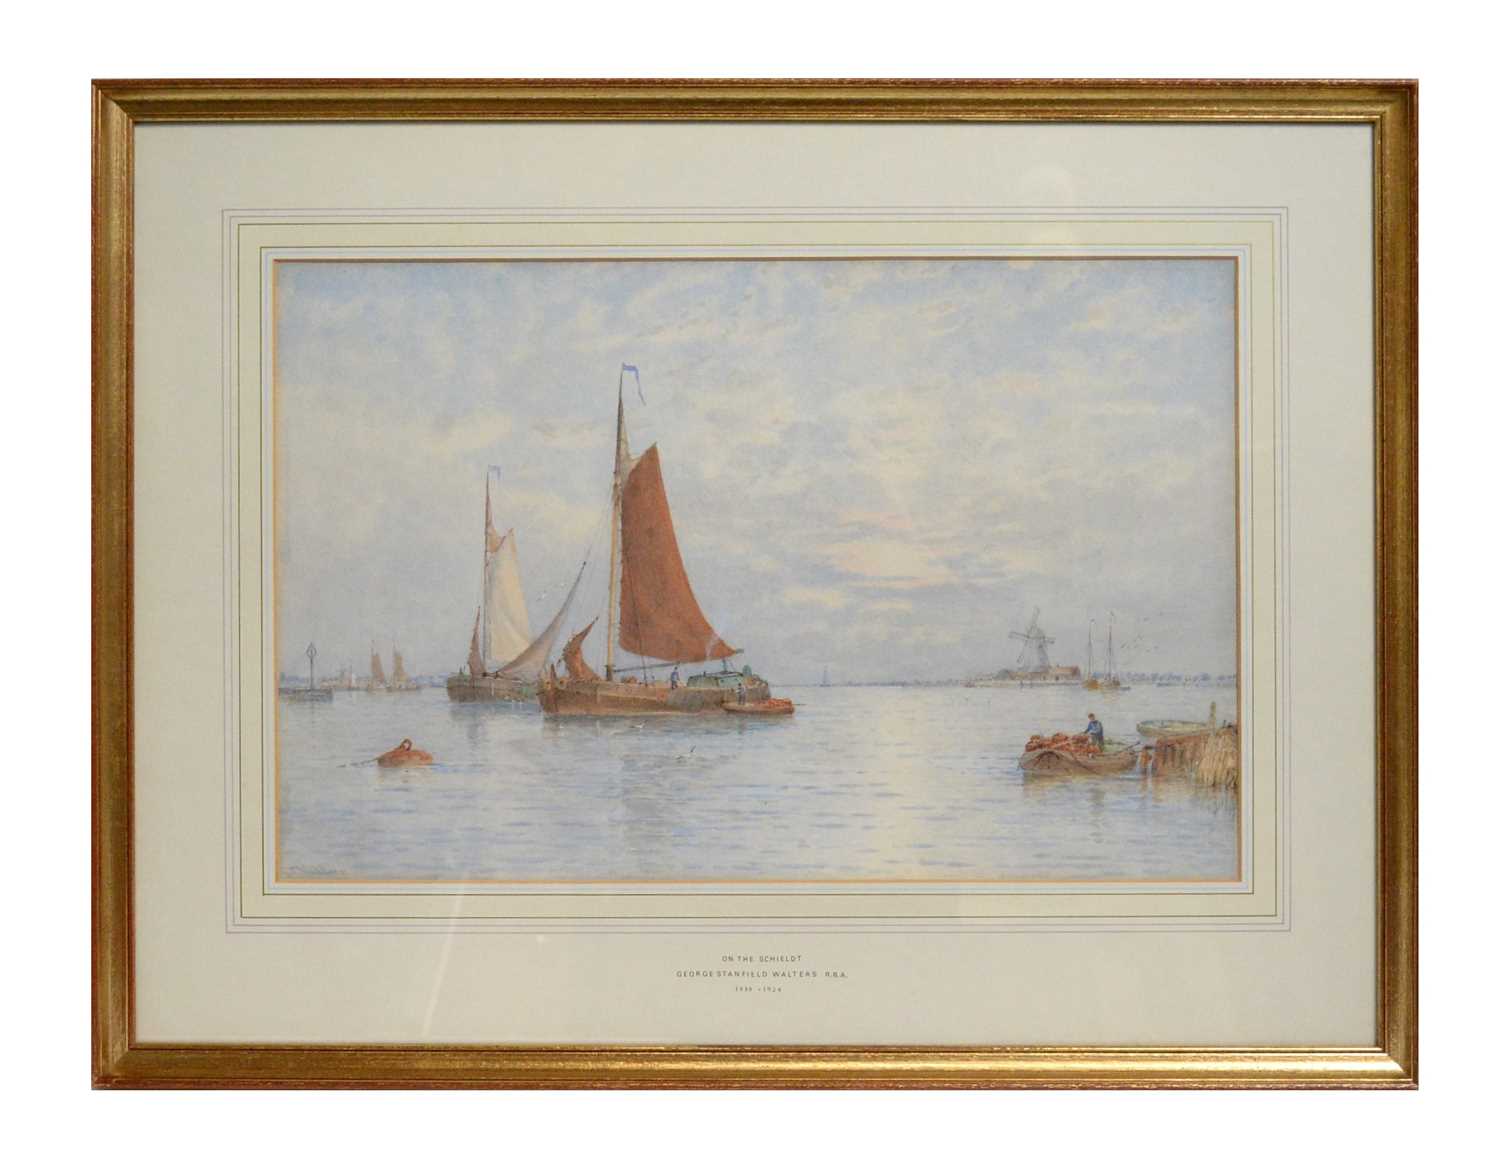 Lot 740 - George Stansfield Walters - On the Schieldt | watercolour